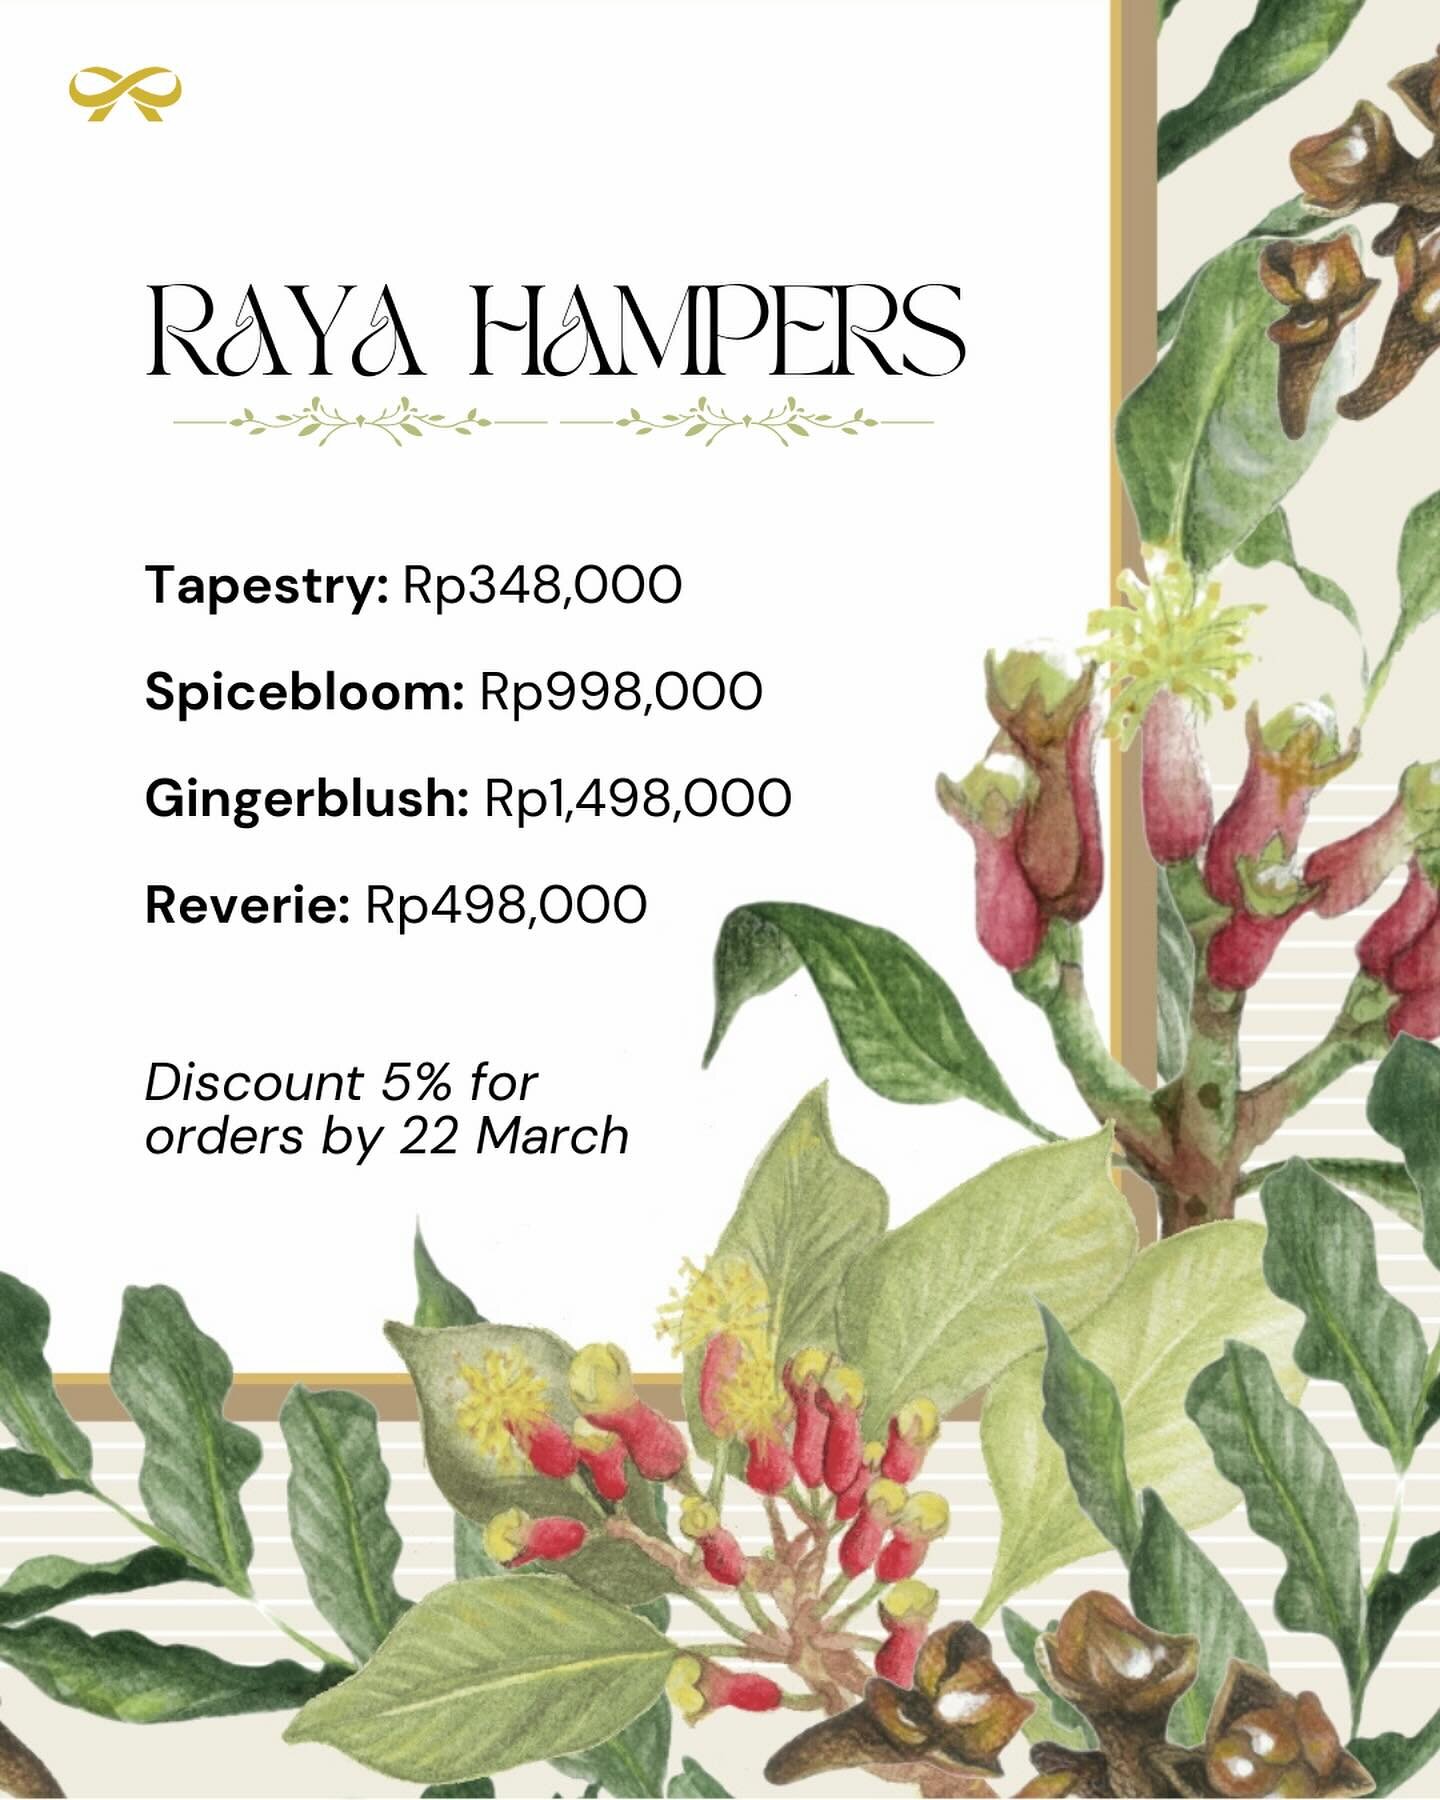 Hi folks! It's Dian here, founder of Kemala. We had a very tough start to 2024 due to family matters so we have been quiet online for the past weeks. But we're now back to offer you some beautifully made Raya Hampers.

This year we have taken inspira